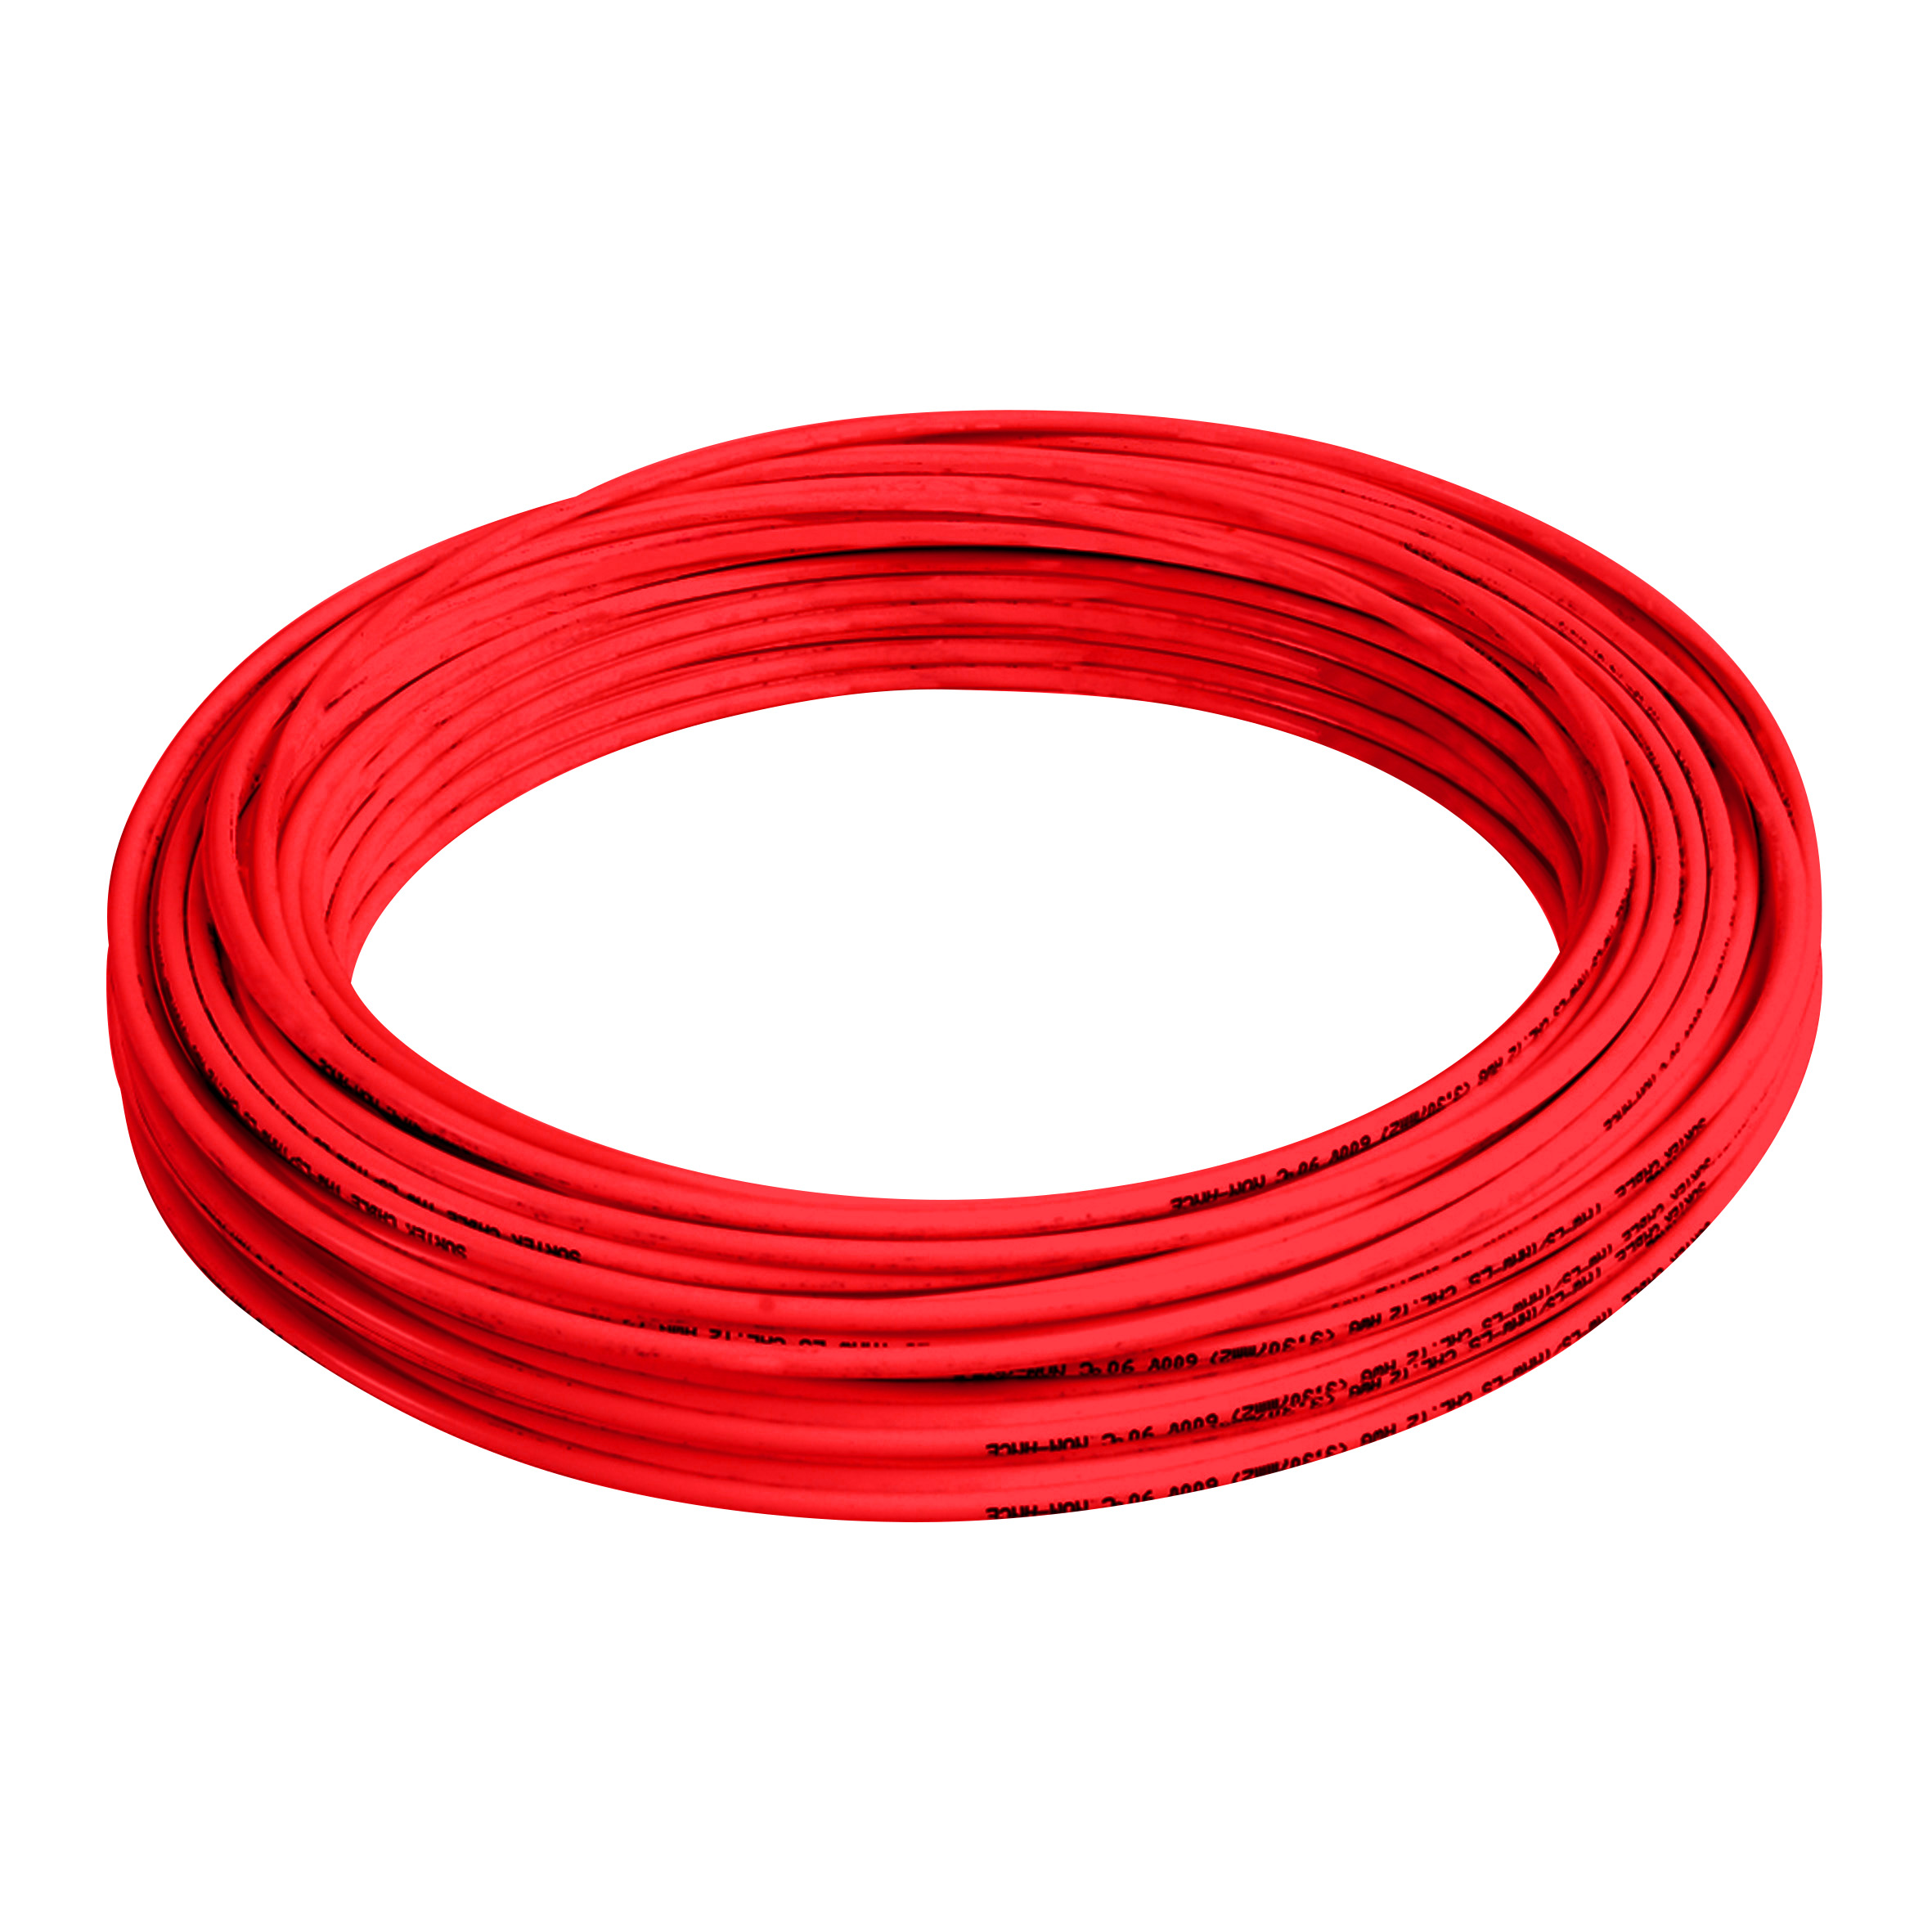 Cable eléctrico tipo THW-LS / THHW-LS Cal.12 100m rojo